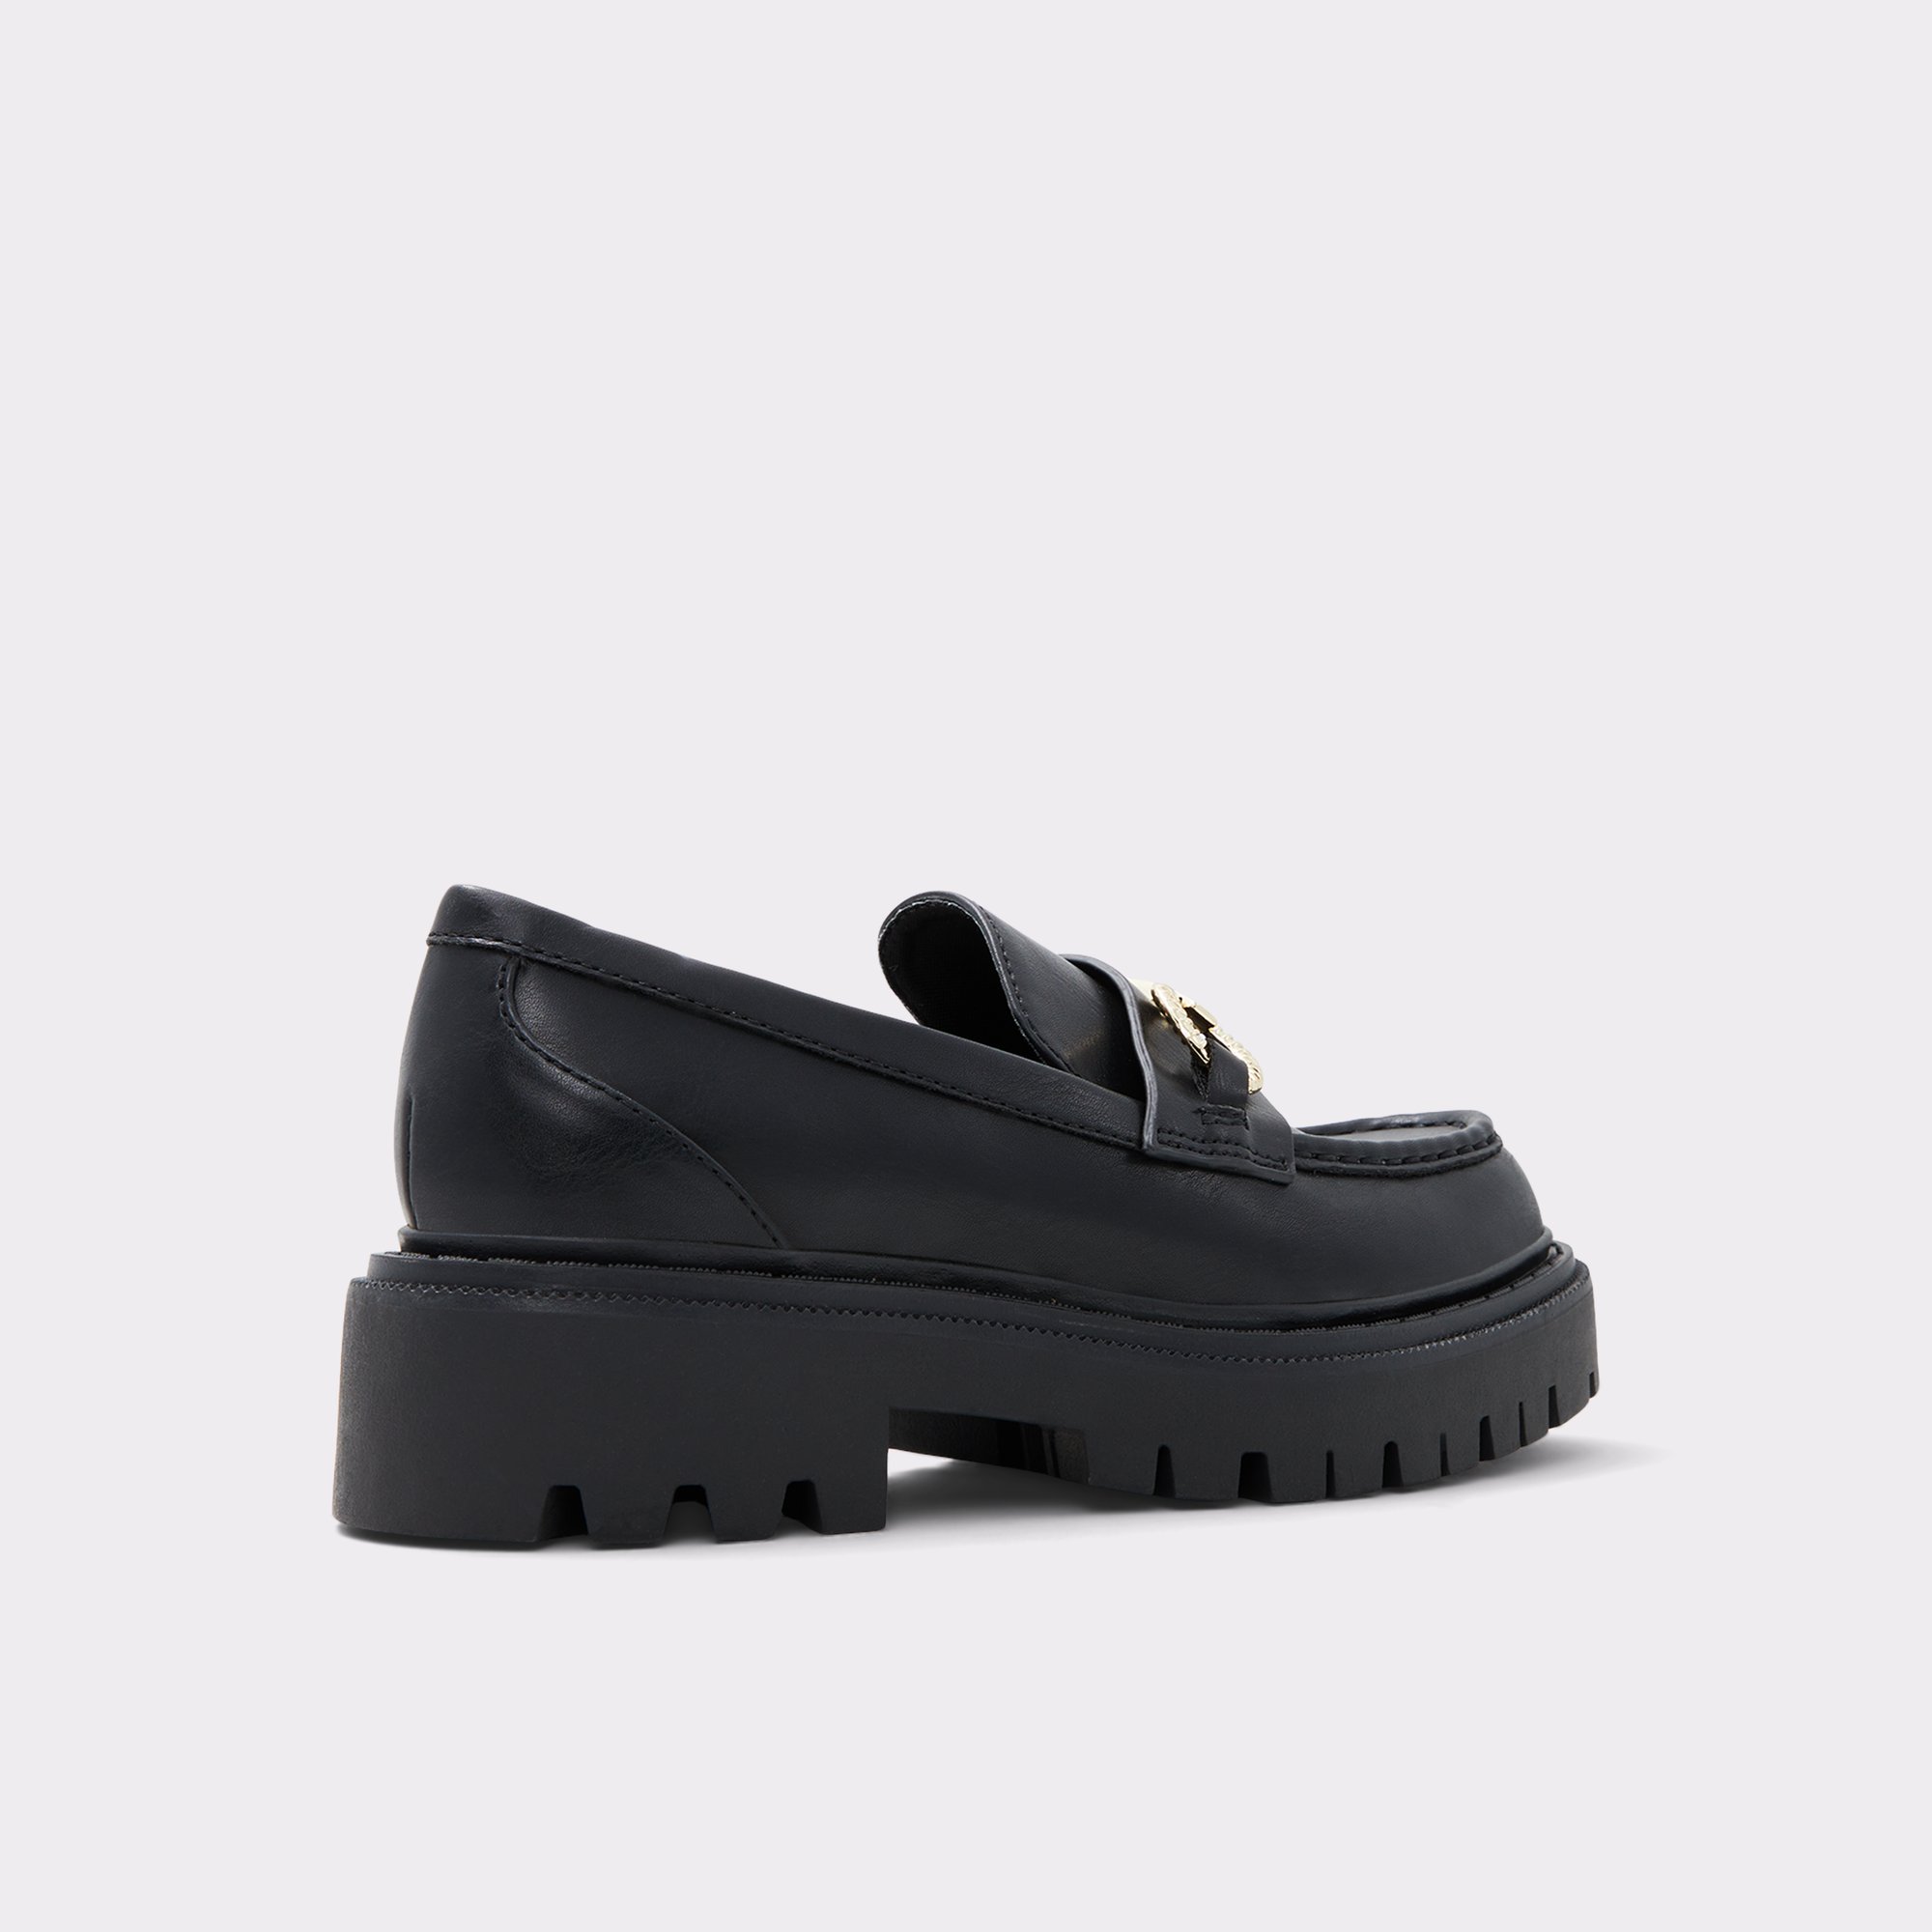 Baberiel Black Synthetic Smooth Women's Loafers & Oxfords | ALDO Canada